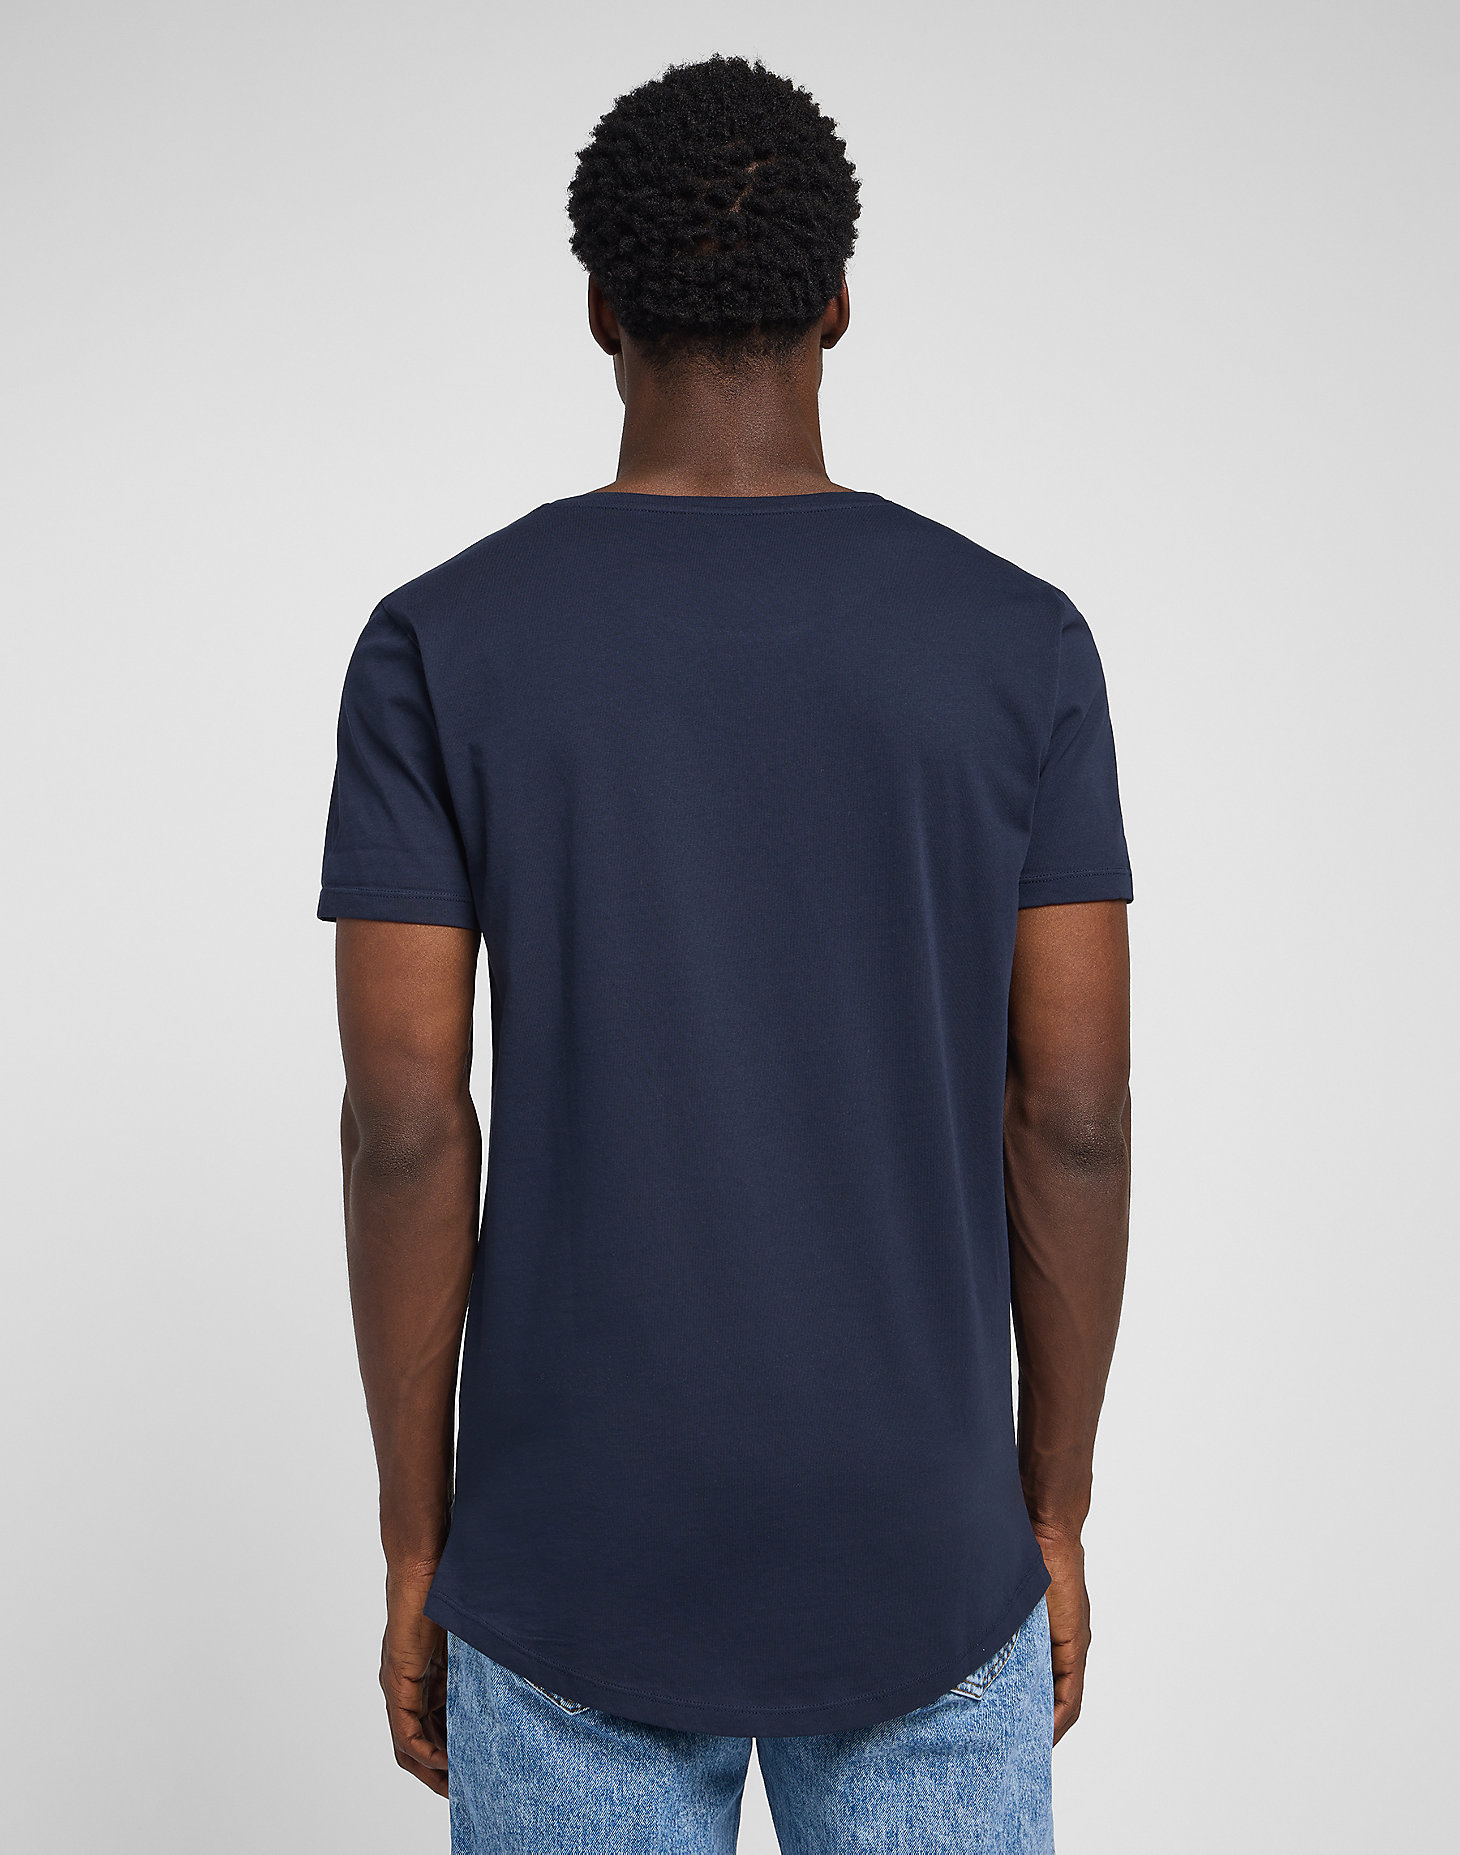 Shaped Tee in Sky Captain alternative view 1